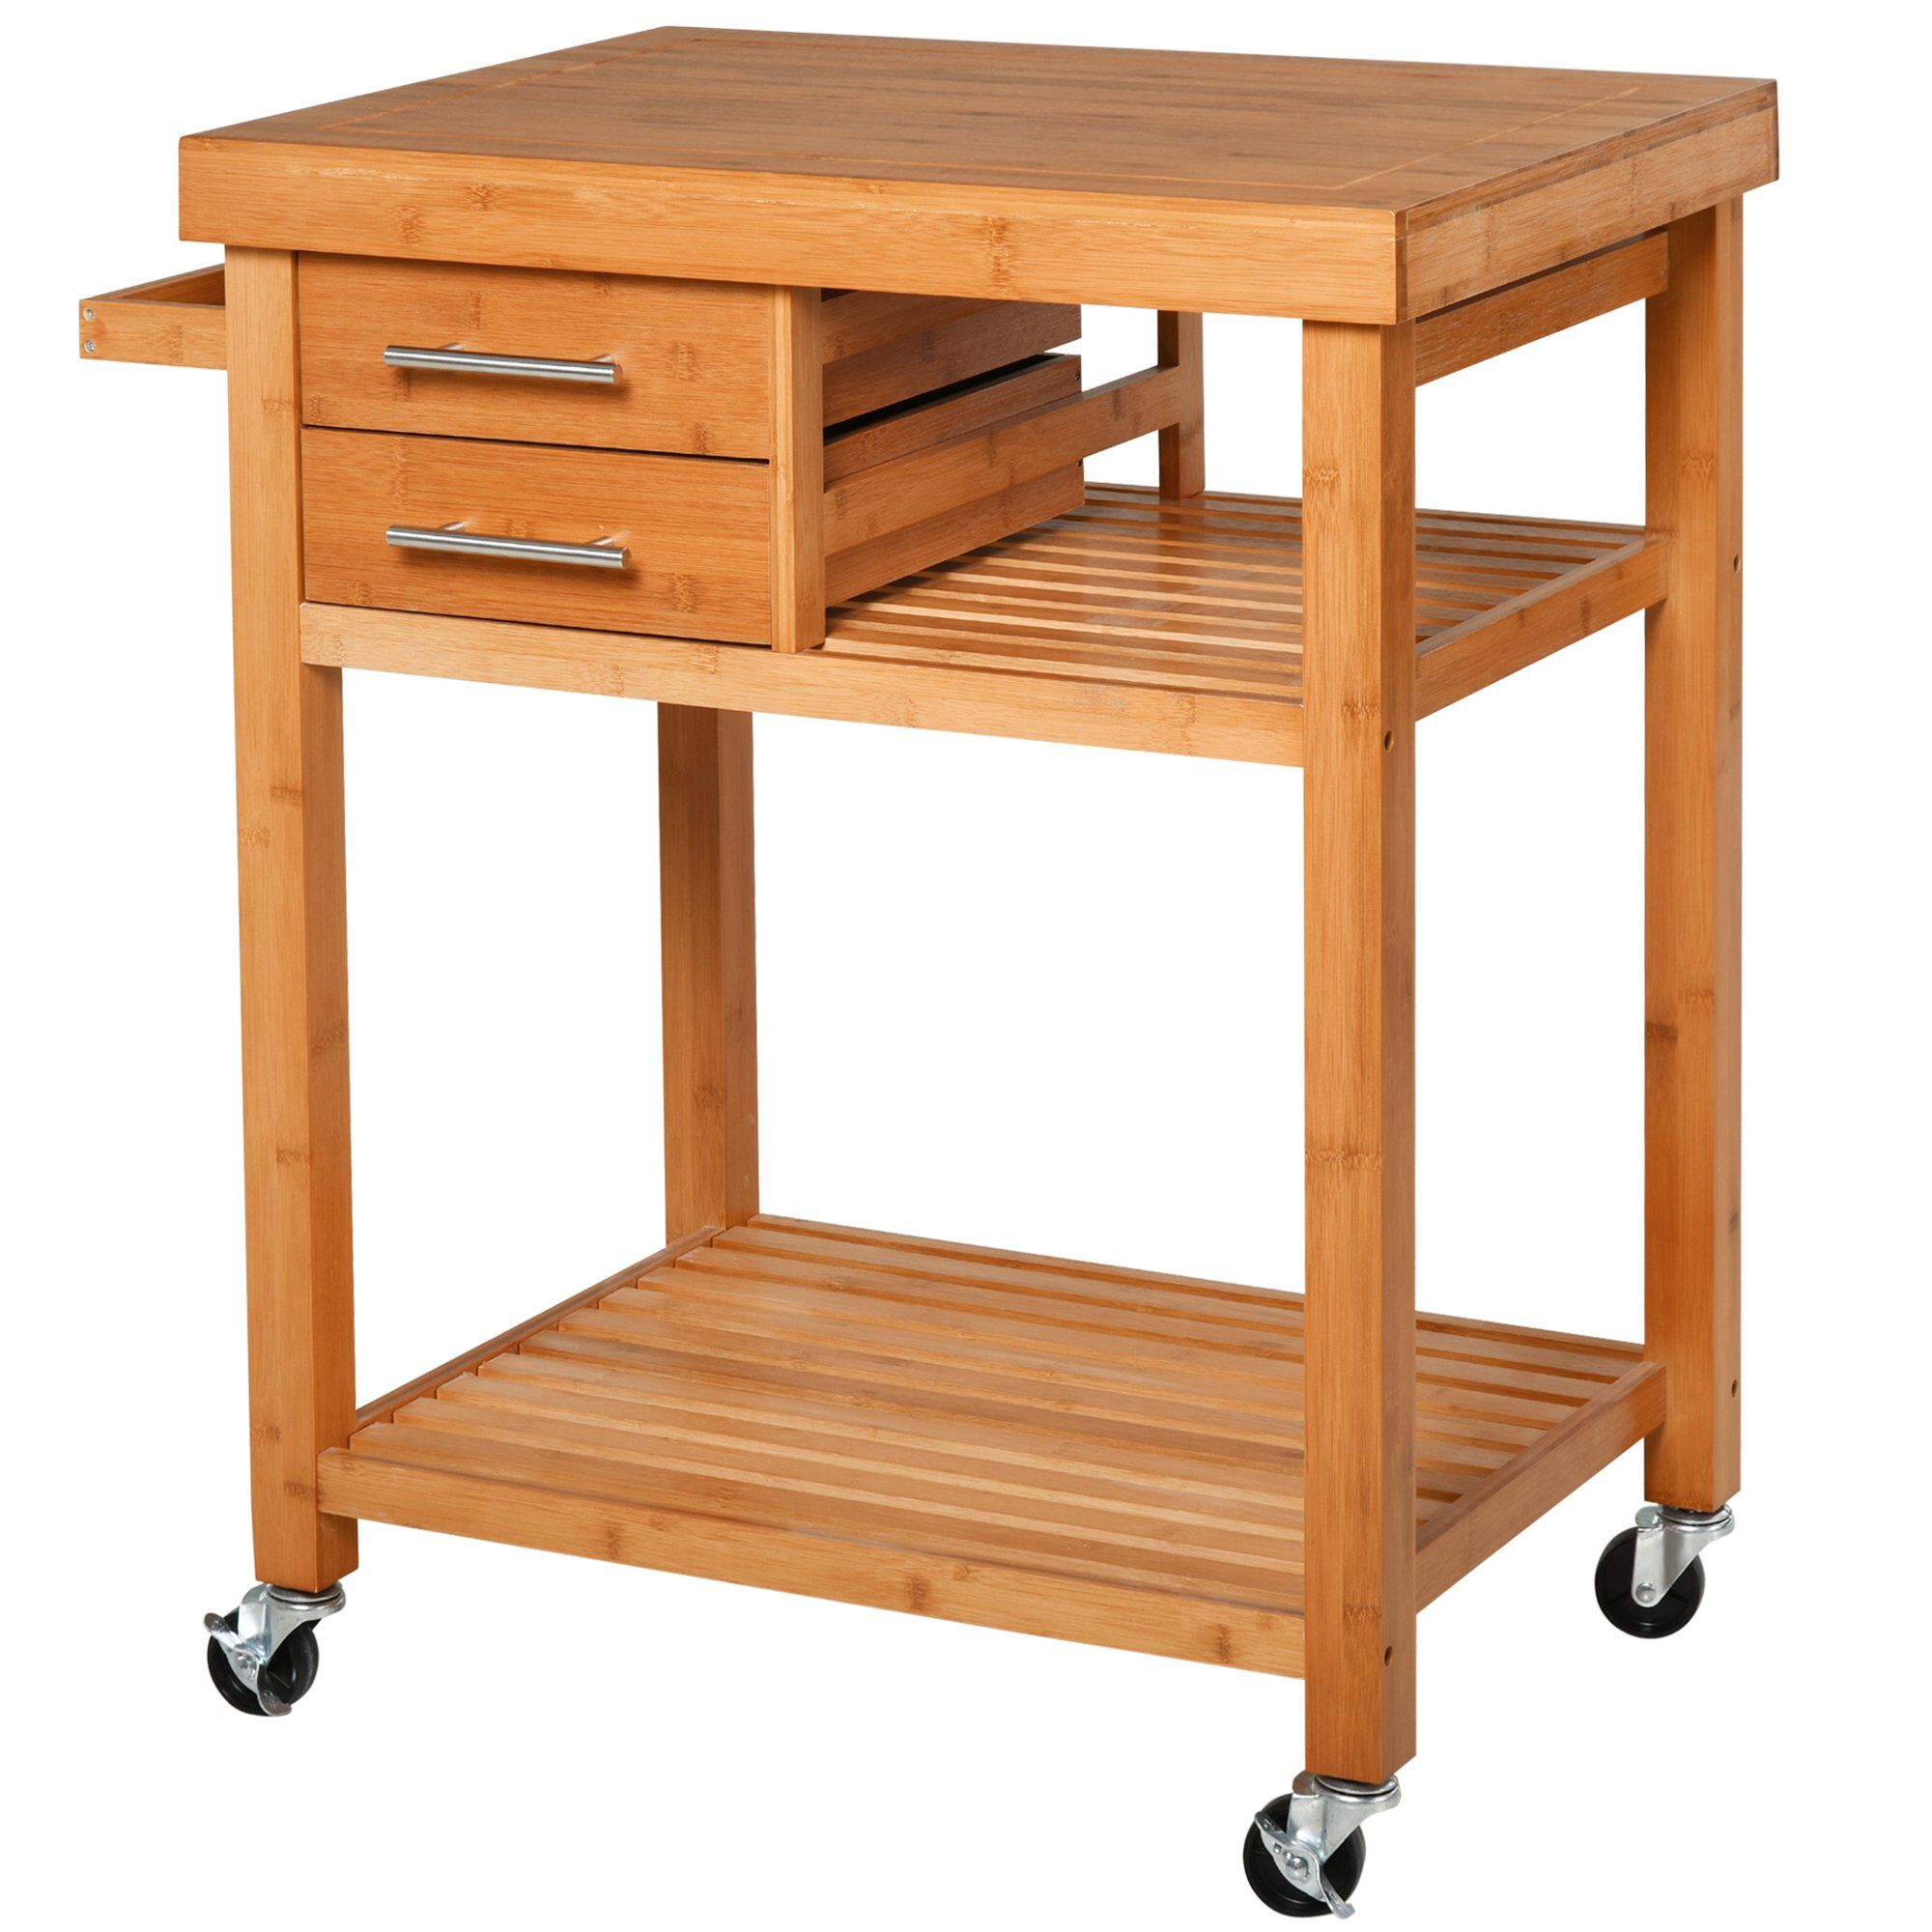 HOMCOM Rolling Kitchen Island Cart Vintage Natural with Wheels Drawers Kitchen Utility Cart for Dining Room   Aosom.com